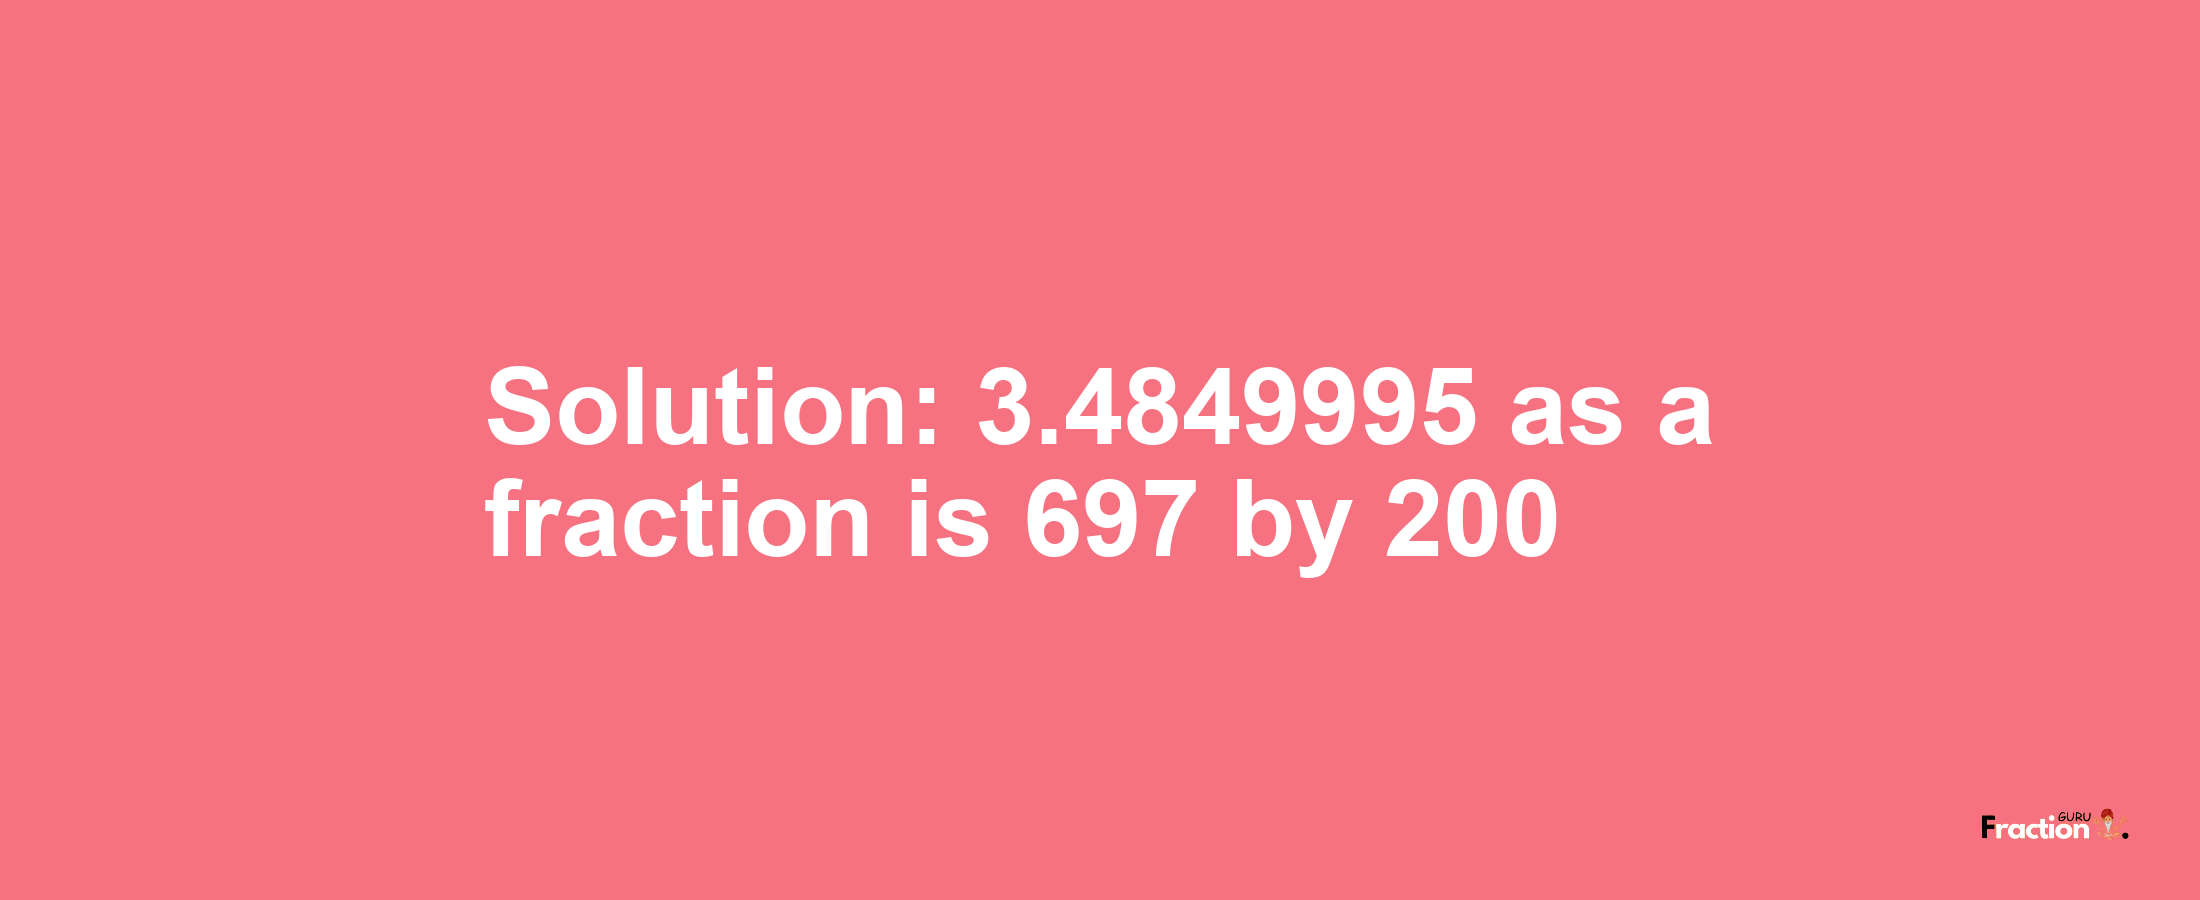 Solution:3.4849995 as a fraction is 697/200